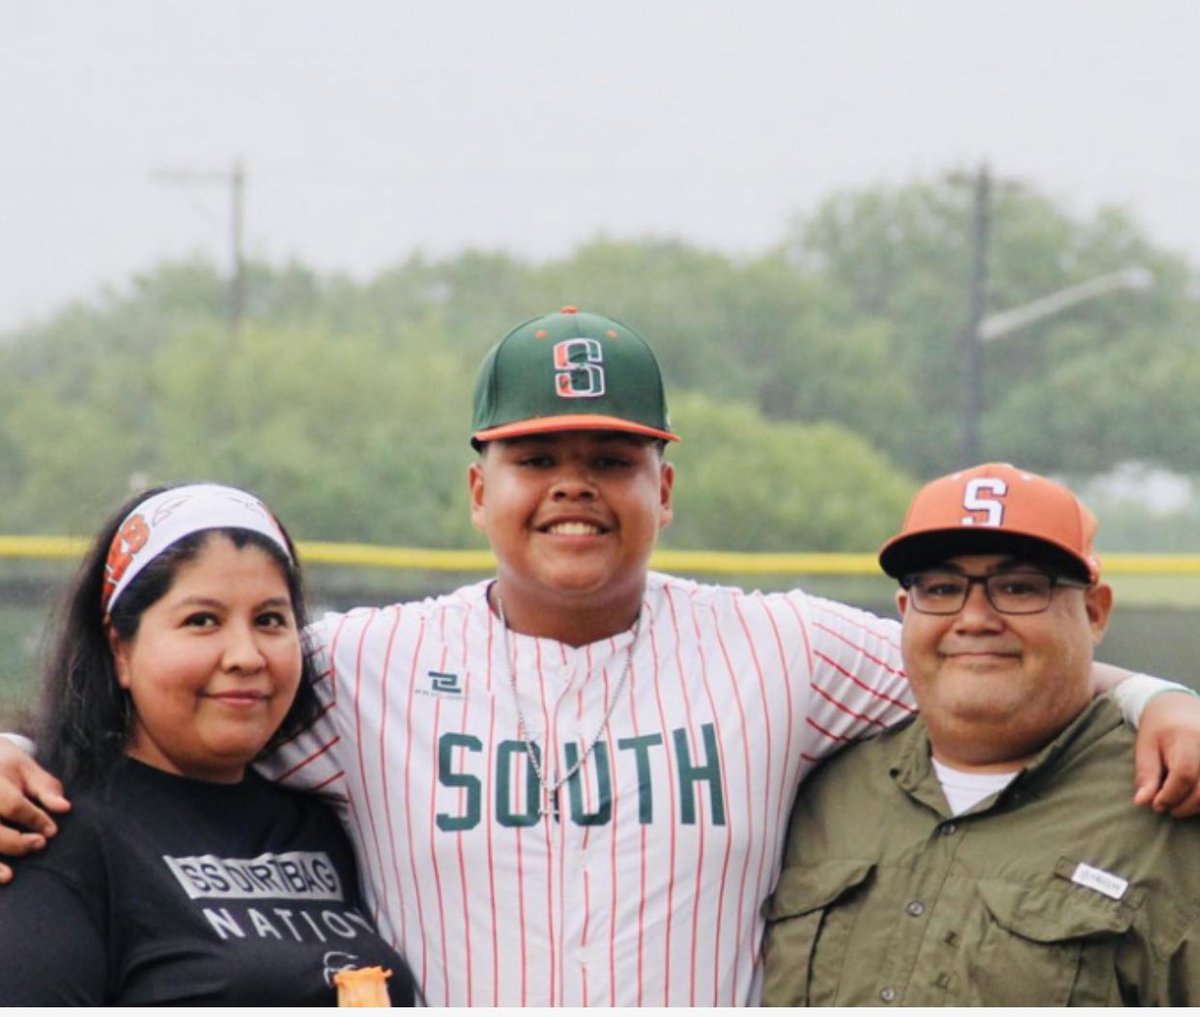 Proud parents of this Southside Dirtbag 
His smile says it all!!! @hhssbaseball @coachdaniel2025 

Love is the most important thing in the world, but baseball is pretty good, too.”
Yogi Berra